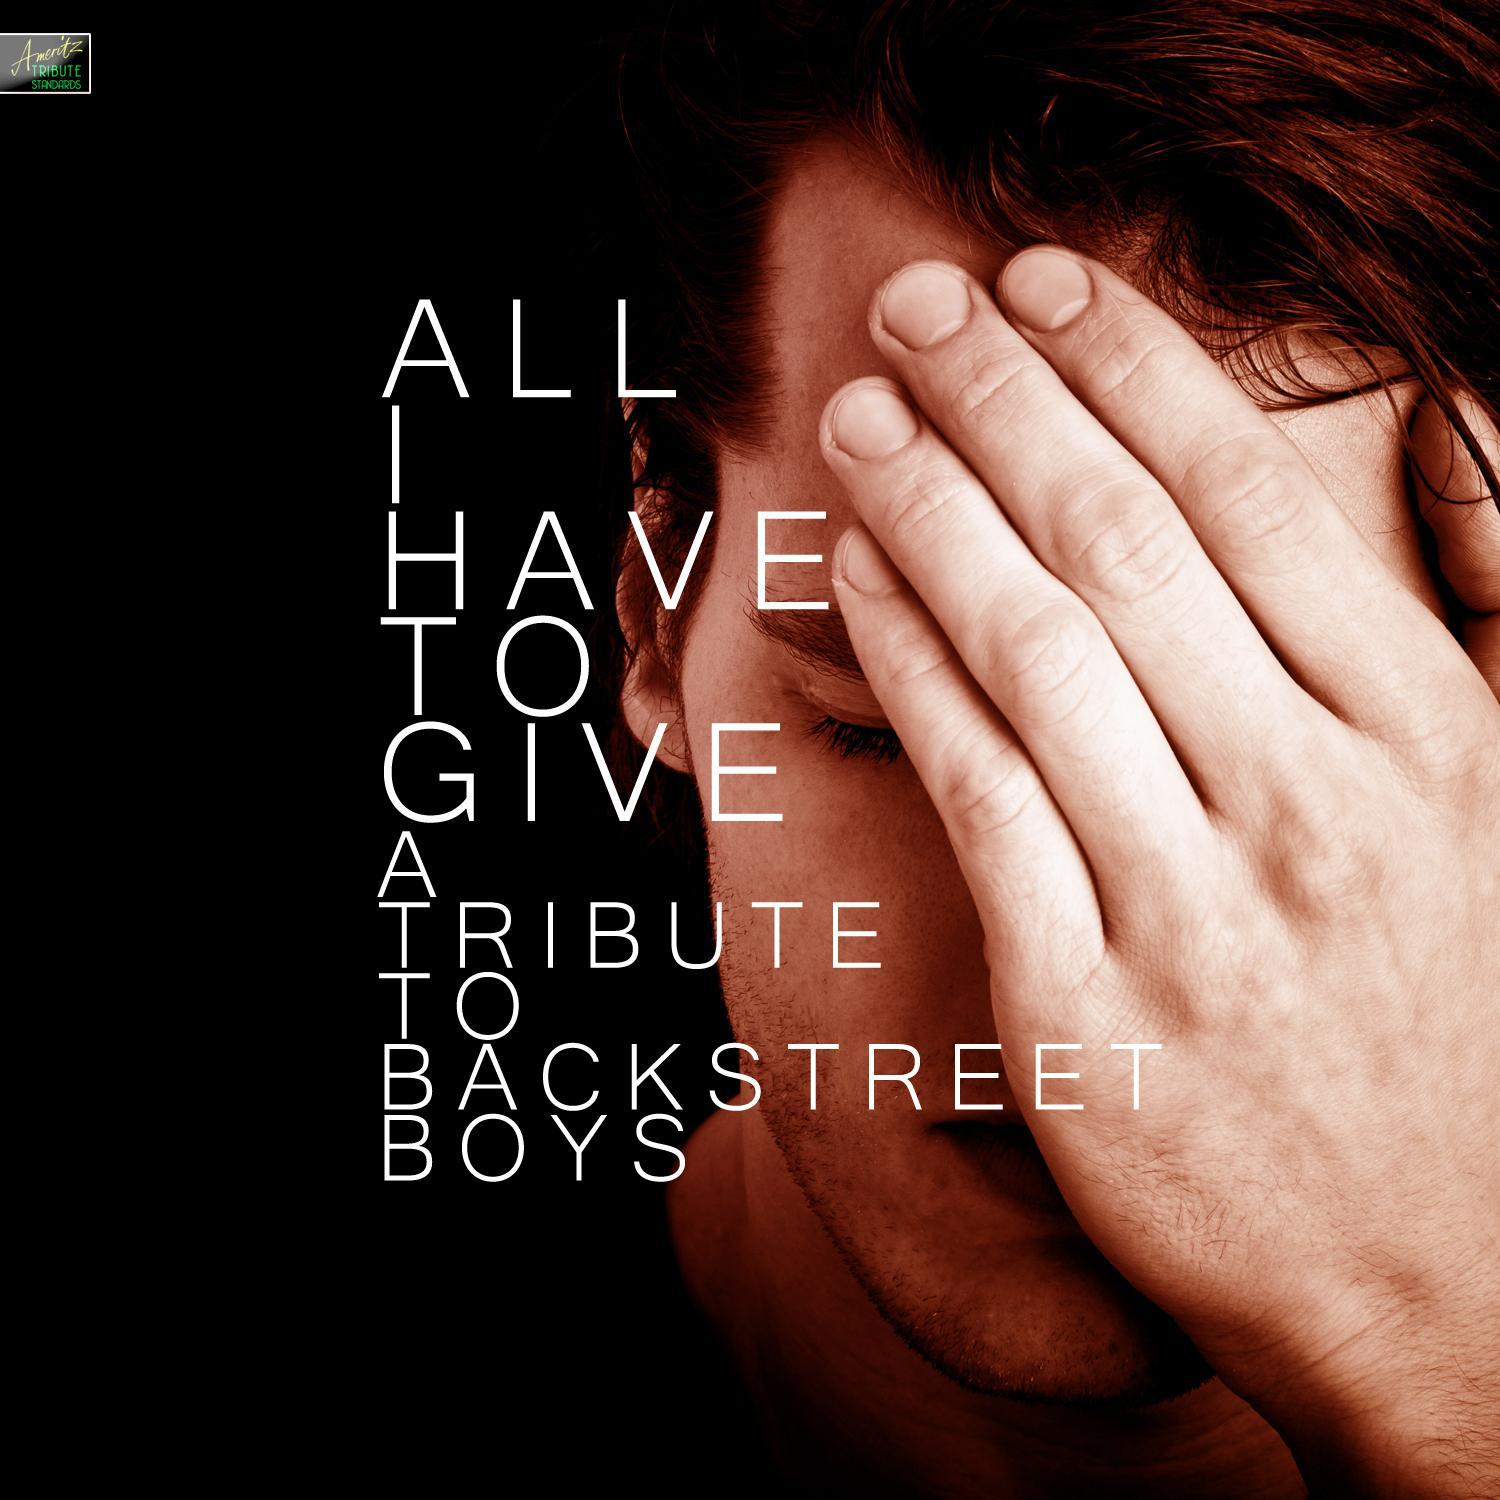 All I Have to Give - A Tribute to Backstreet Boys